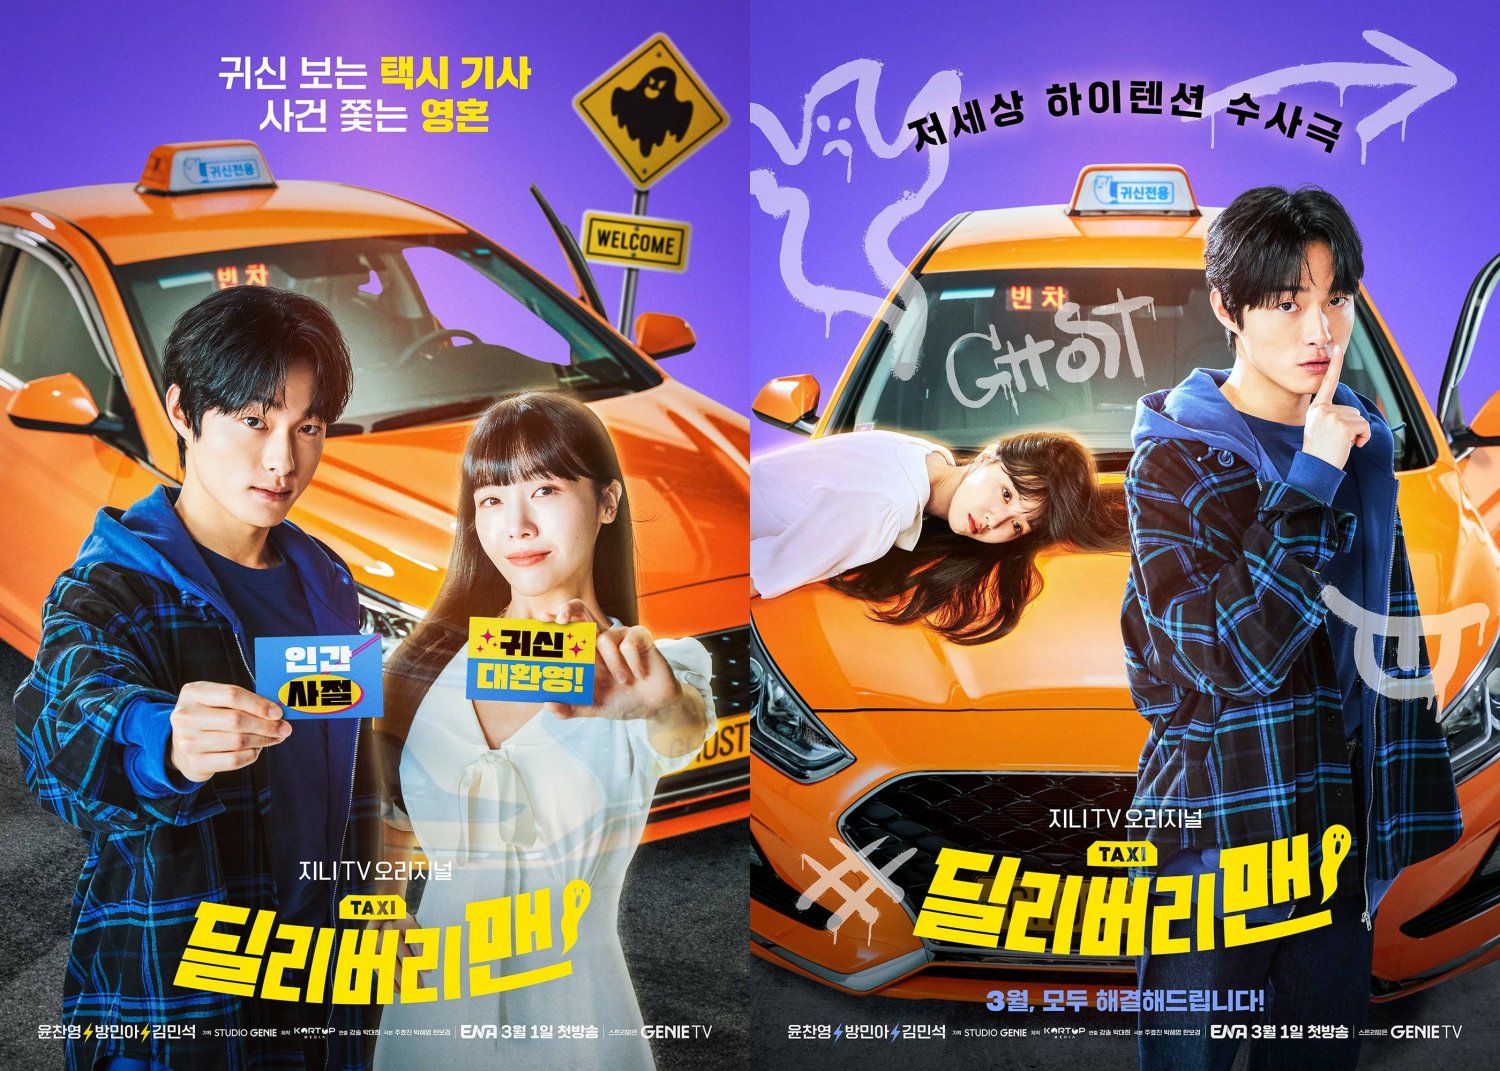 [Photos] New Posters Added for the Korean Drama 'Delivery Man